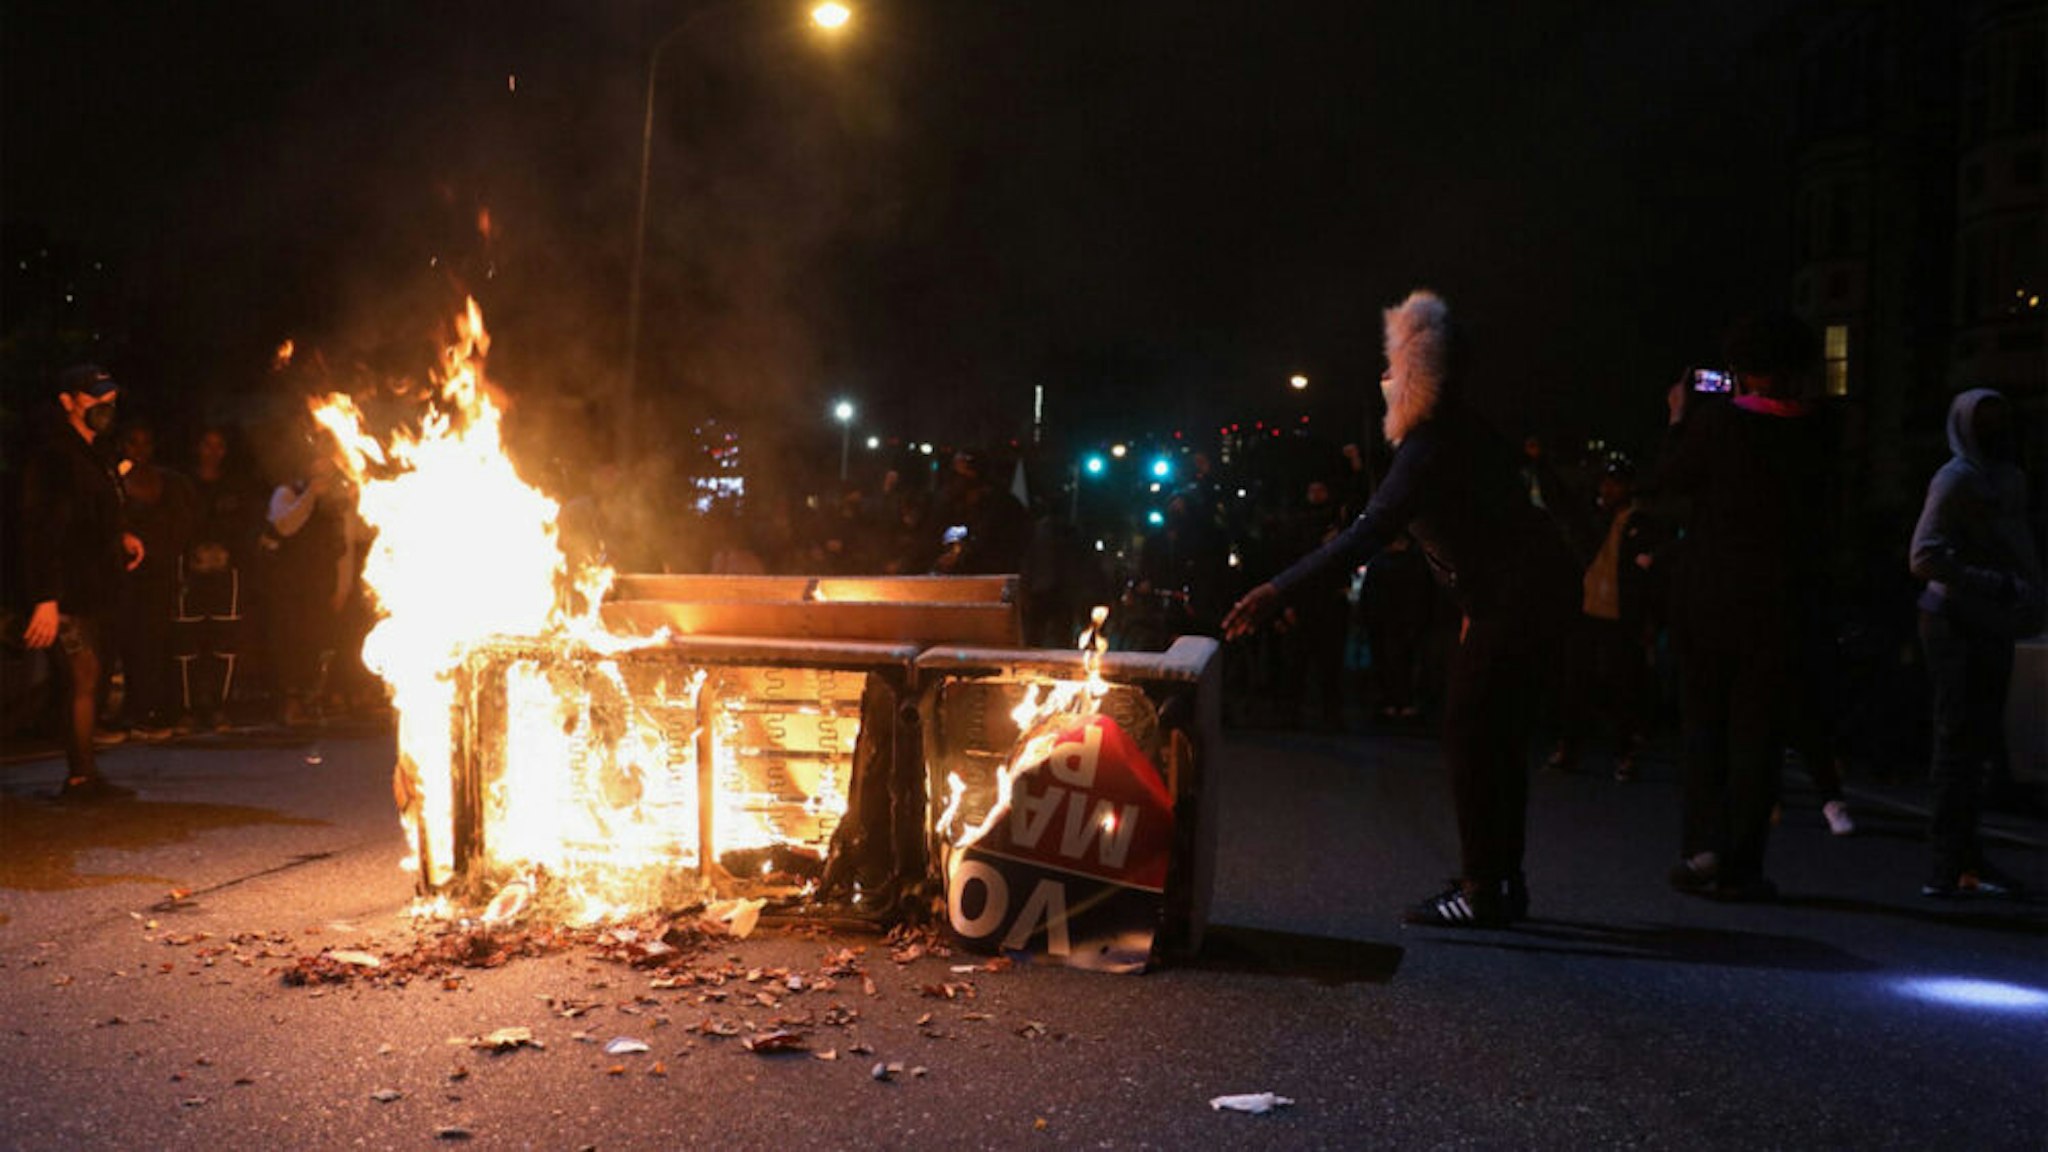 Demonstrators stand near a burning barricade in Philadelphia on October 27, 2020, during a protest over the police shooting of 27-year-old Black man Walter Wallace. - Hundreds of people demonstrated in Philadelphia late on October 27, with looting and violence breaking out in a second night of unrest after the latest police shooting of a Black man in the US. The fresh unrest came a day after the death of 27-year-old Walter Wallace, whose family said he suffered mental health issues. On Monday night hundreds of demonstrators took to the streets, with riot police pushing them back with shields and batons.